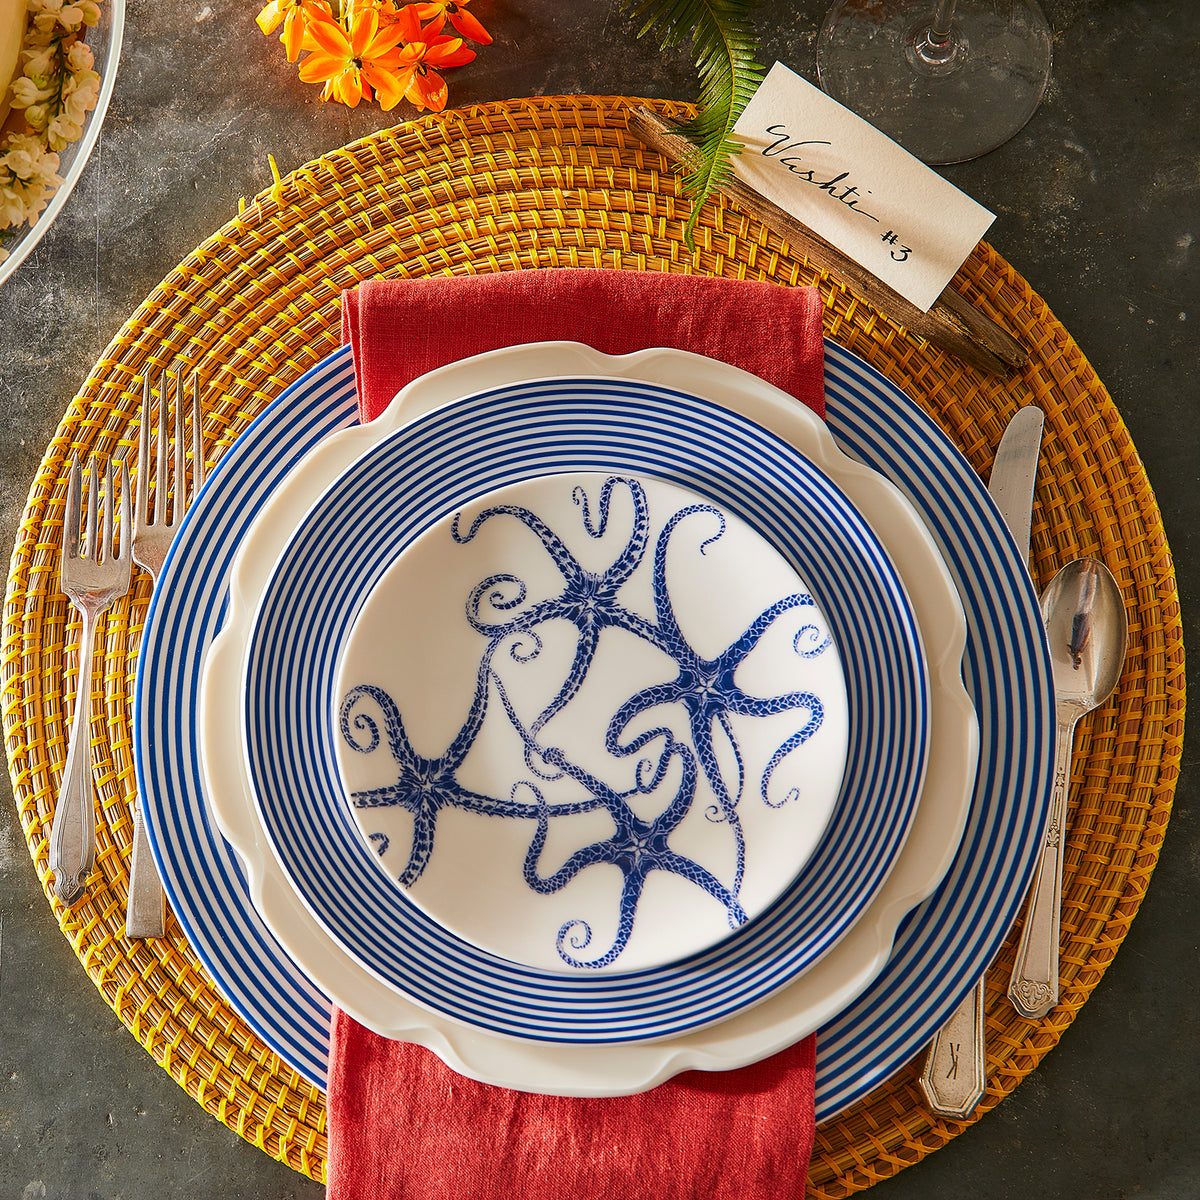 The Starfish Canapé Plates S/4. Here, a single small plate is shown as part of a mixed blue and white table setting.